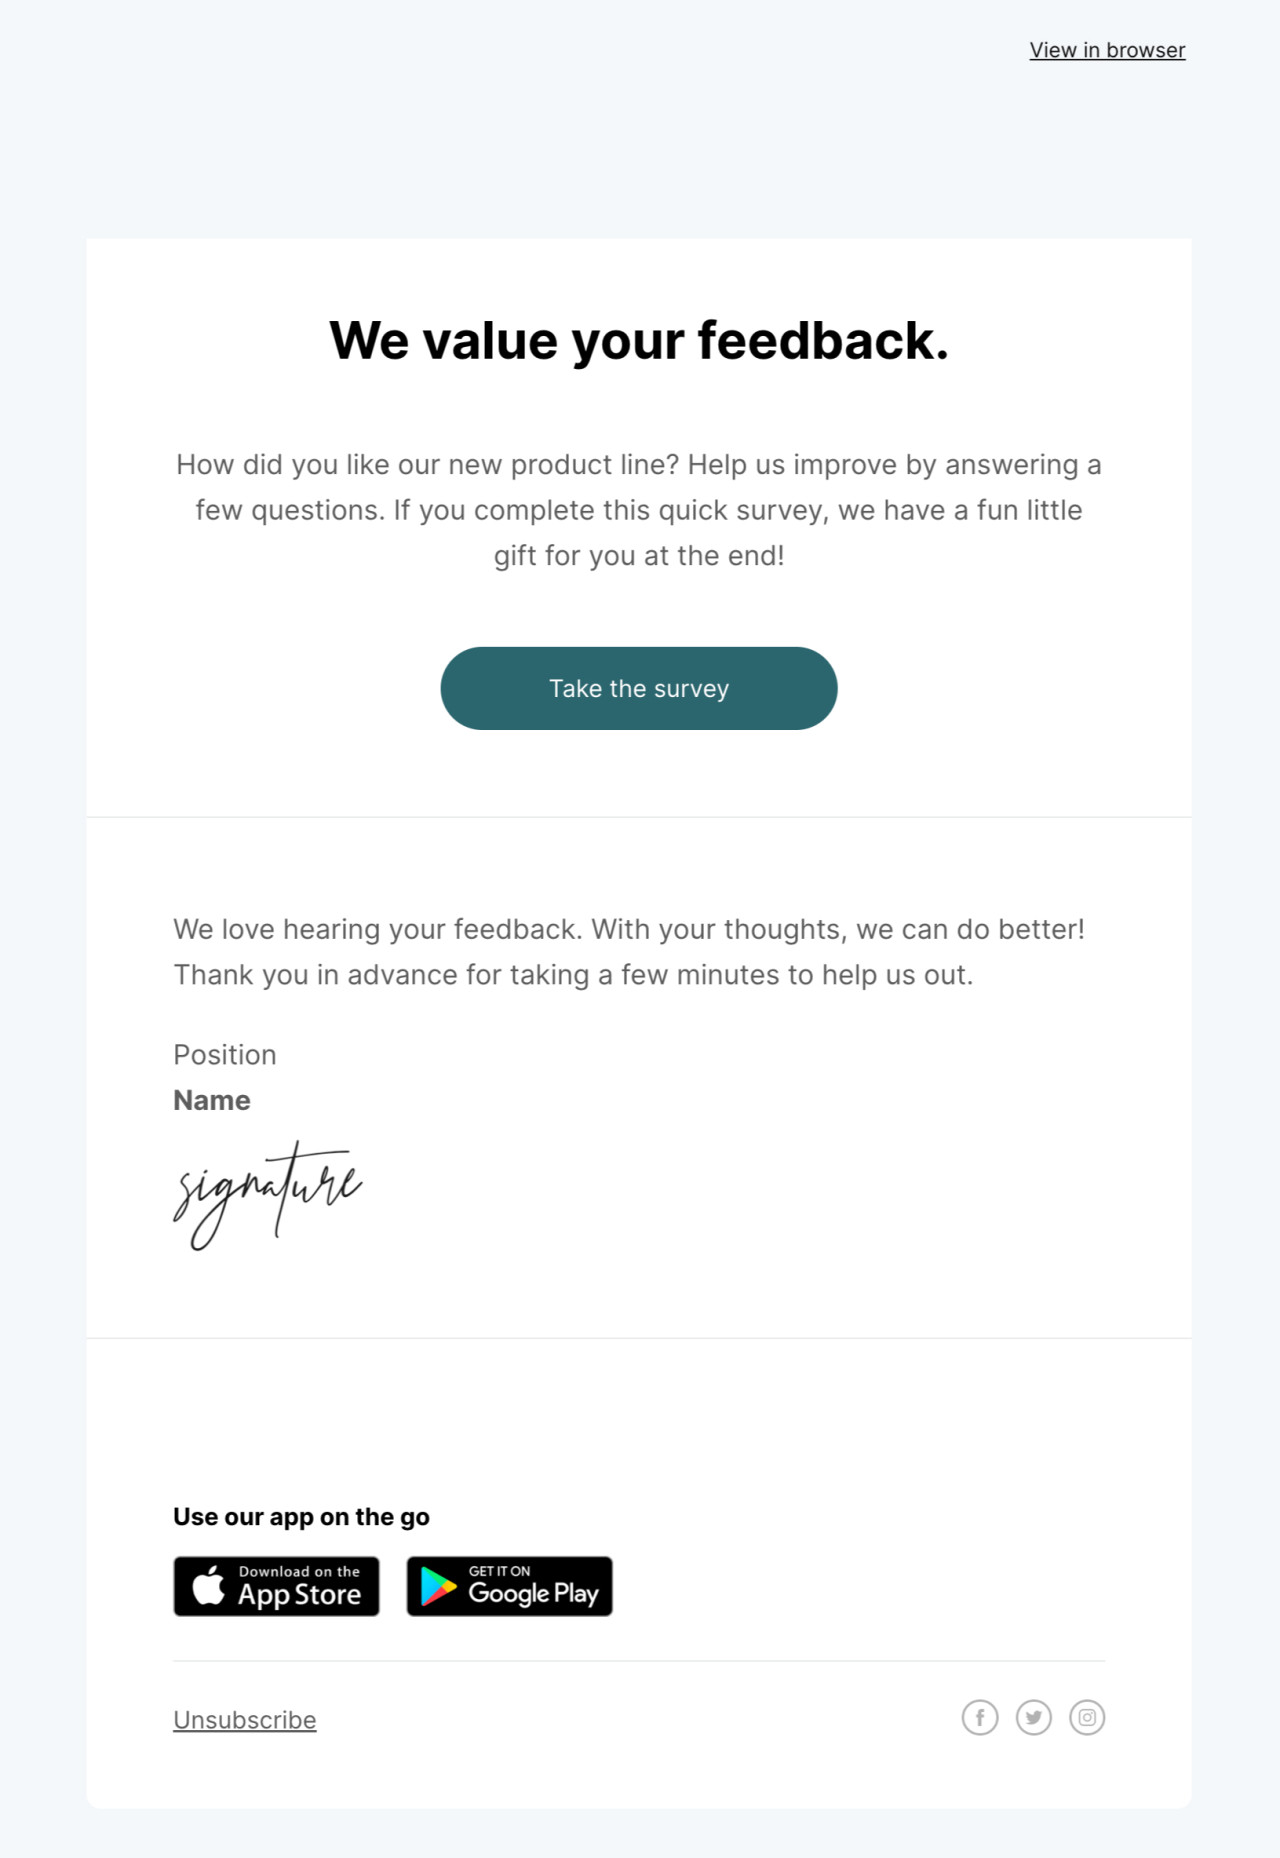 Feedback email template - Made by MailerLite